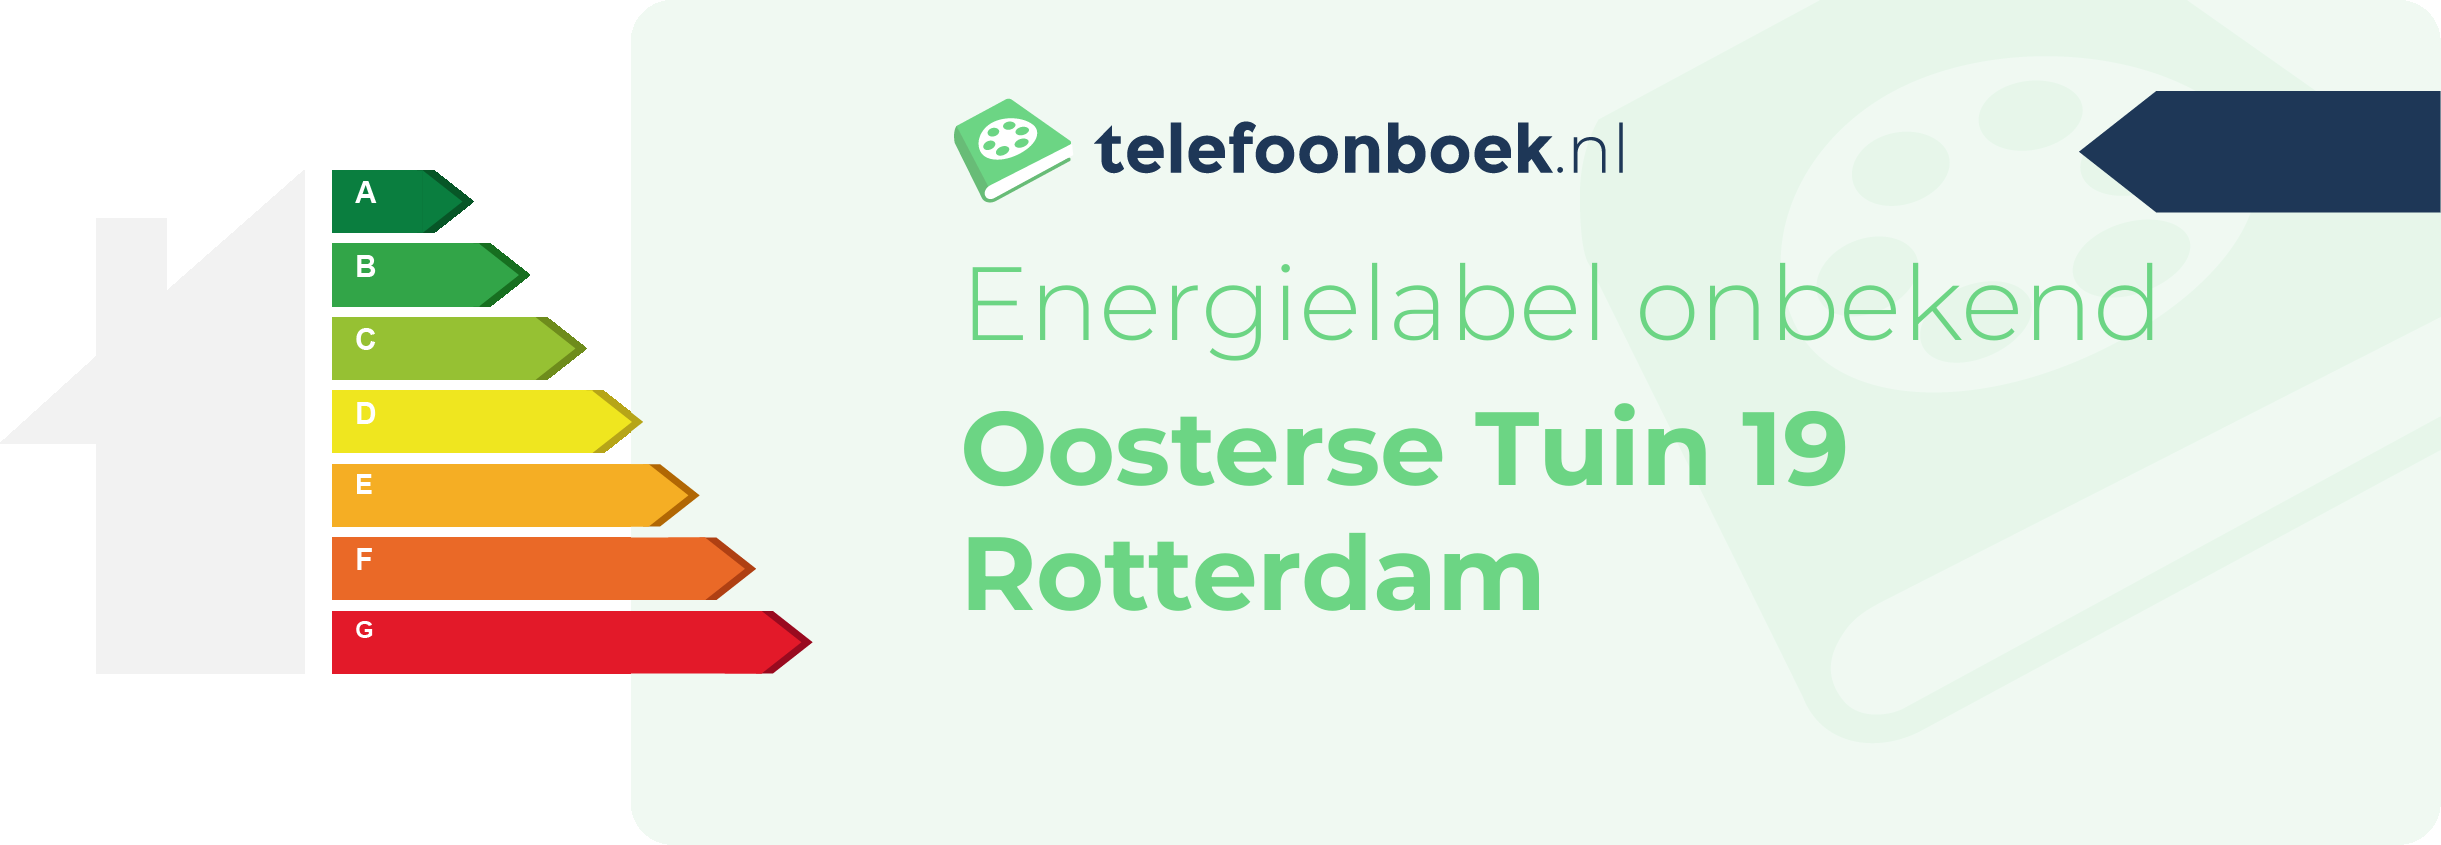 Energielabel Oosterse Tuin 19 Rotterdam